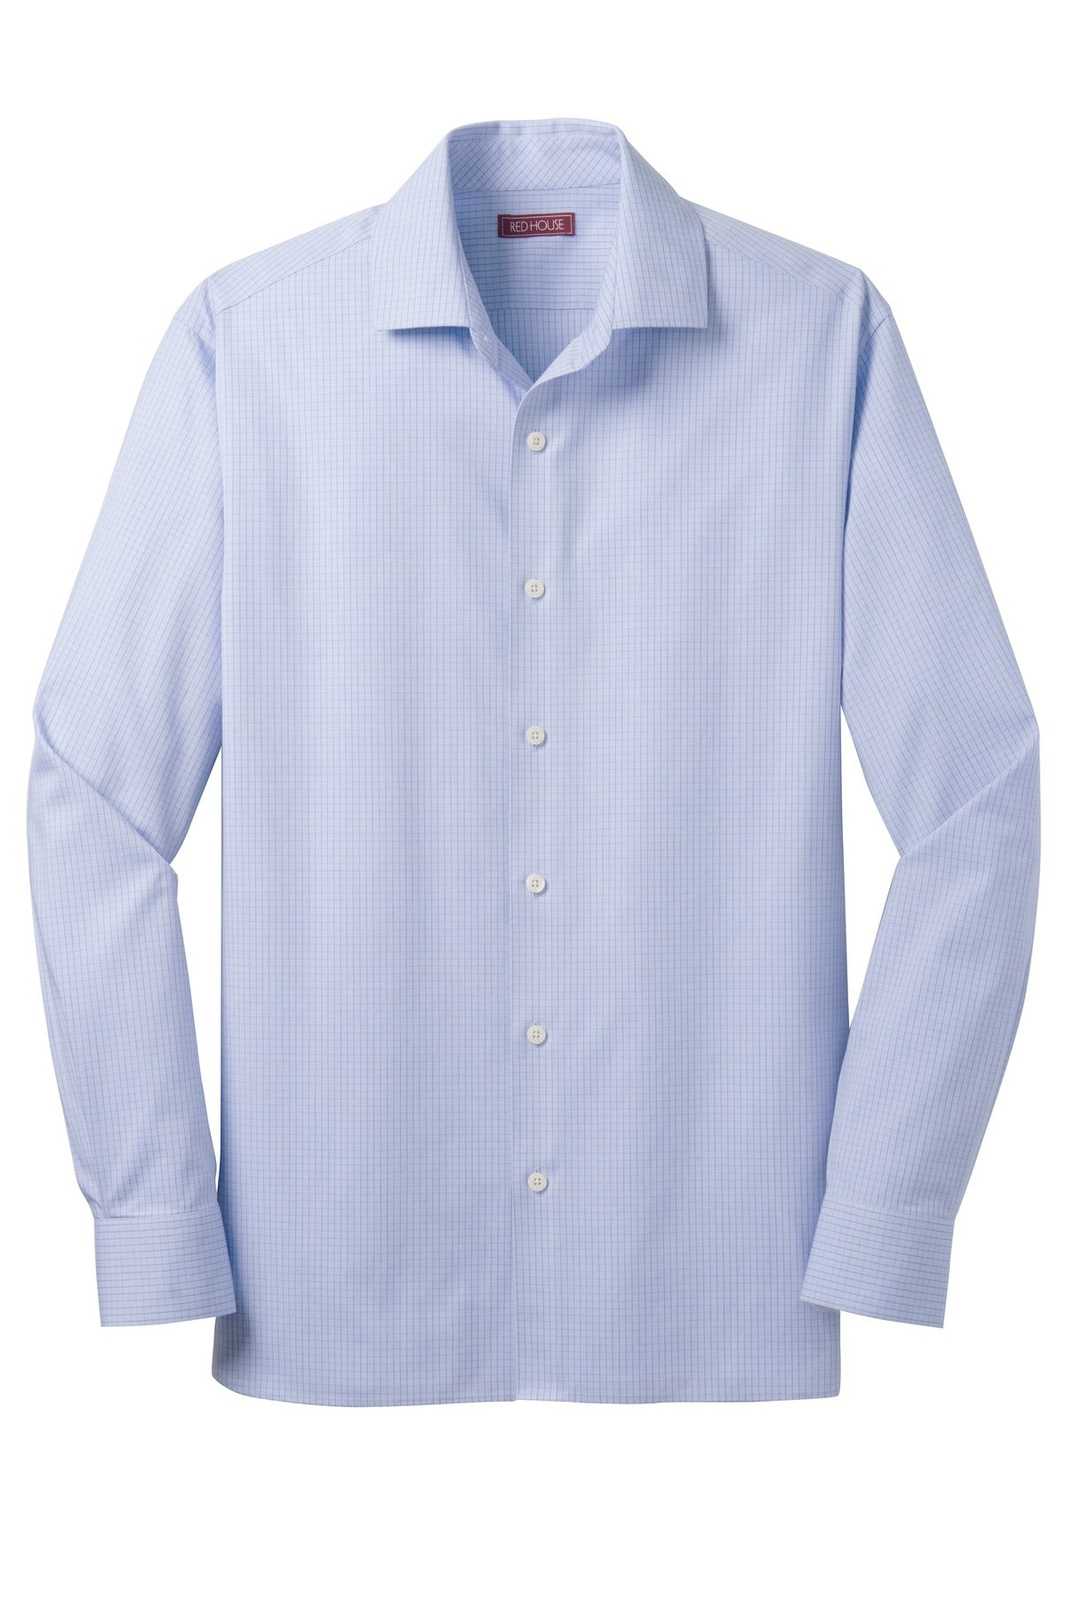 Red House RH81 Graph Check Non-Iron Shirt - Light Blue - HIT a Double - 4